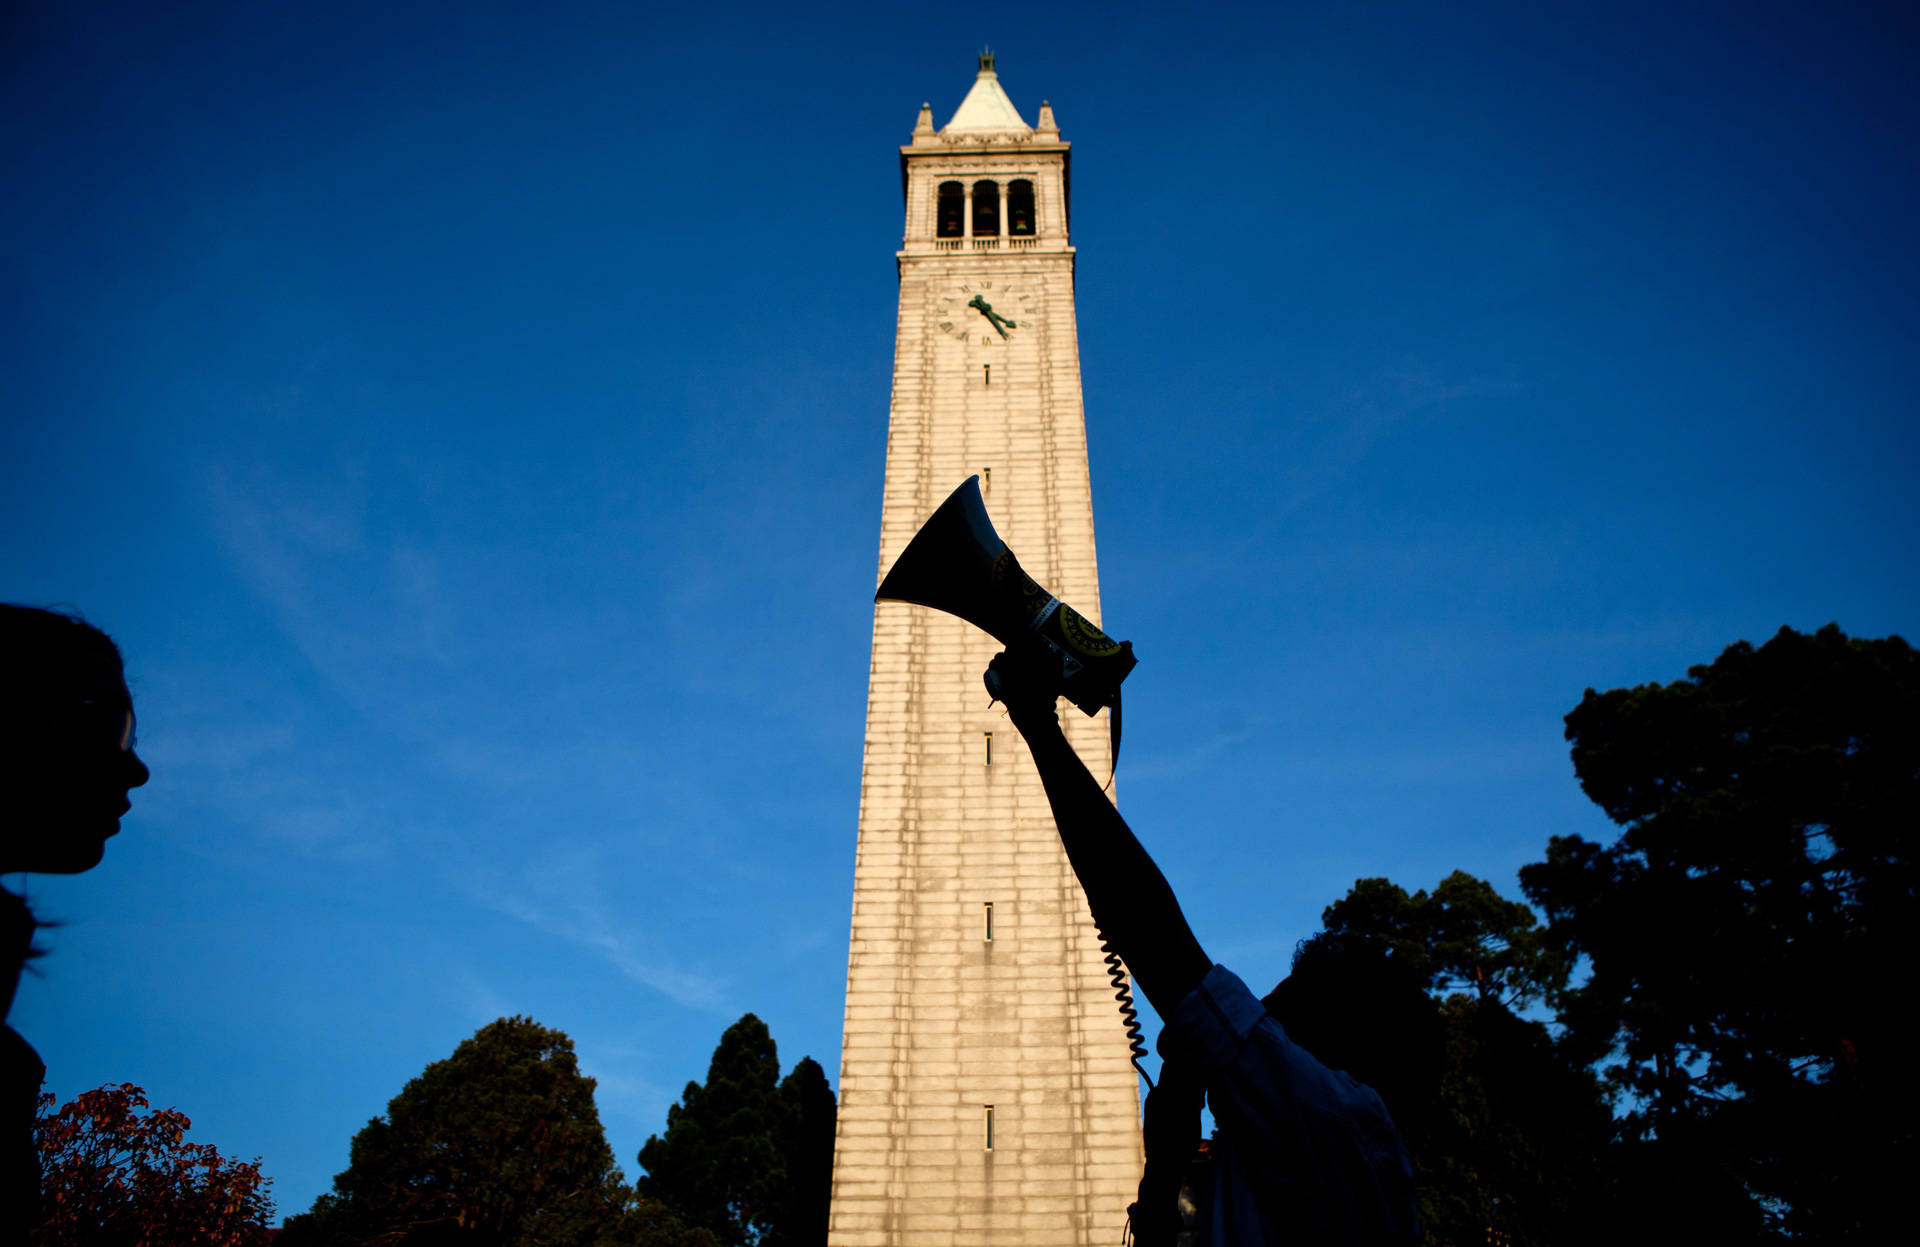 Sather Tower on the campus of UC Berkeley. Max Whittaker/Getty Images